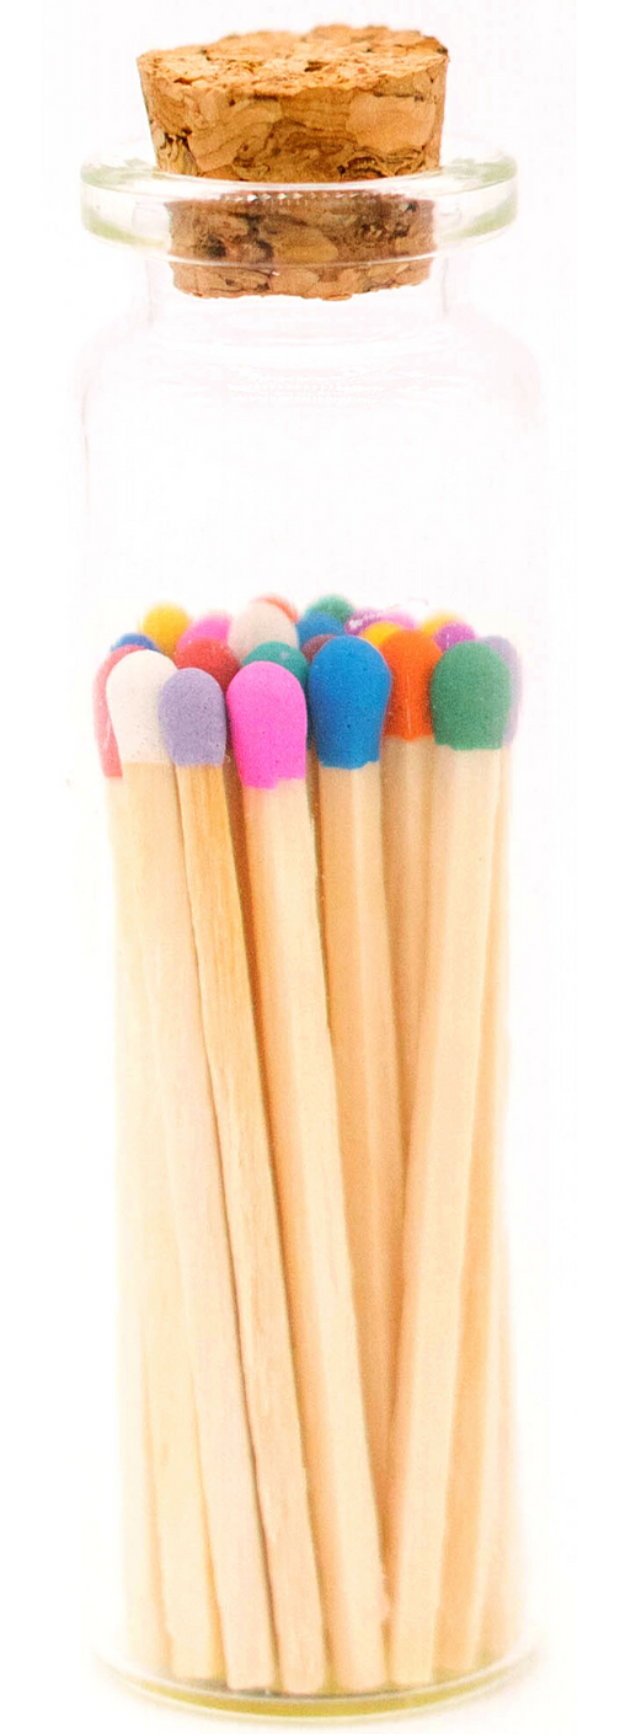 Tip Decorative Matches In Jar with striker available in 5 COLORS